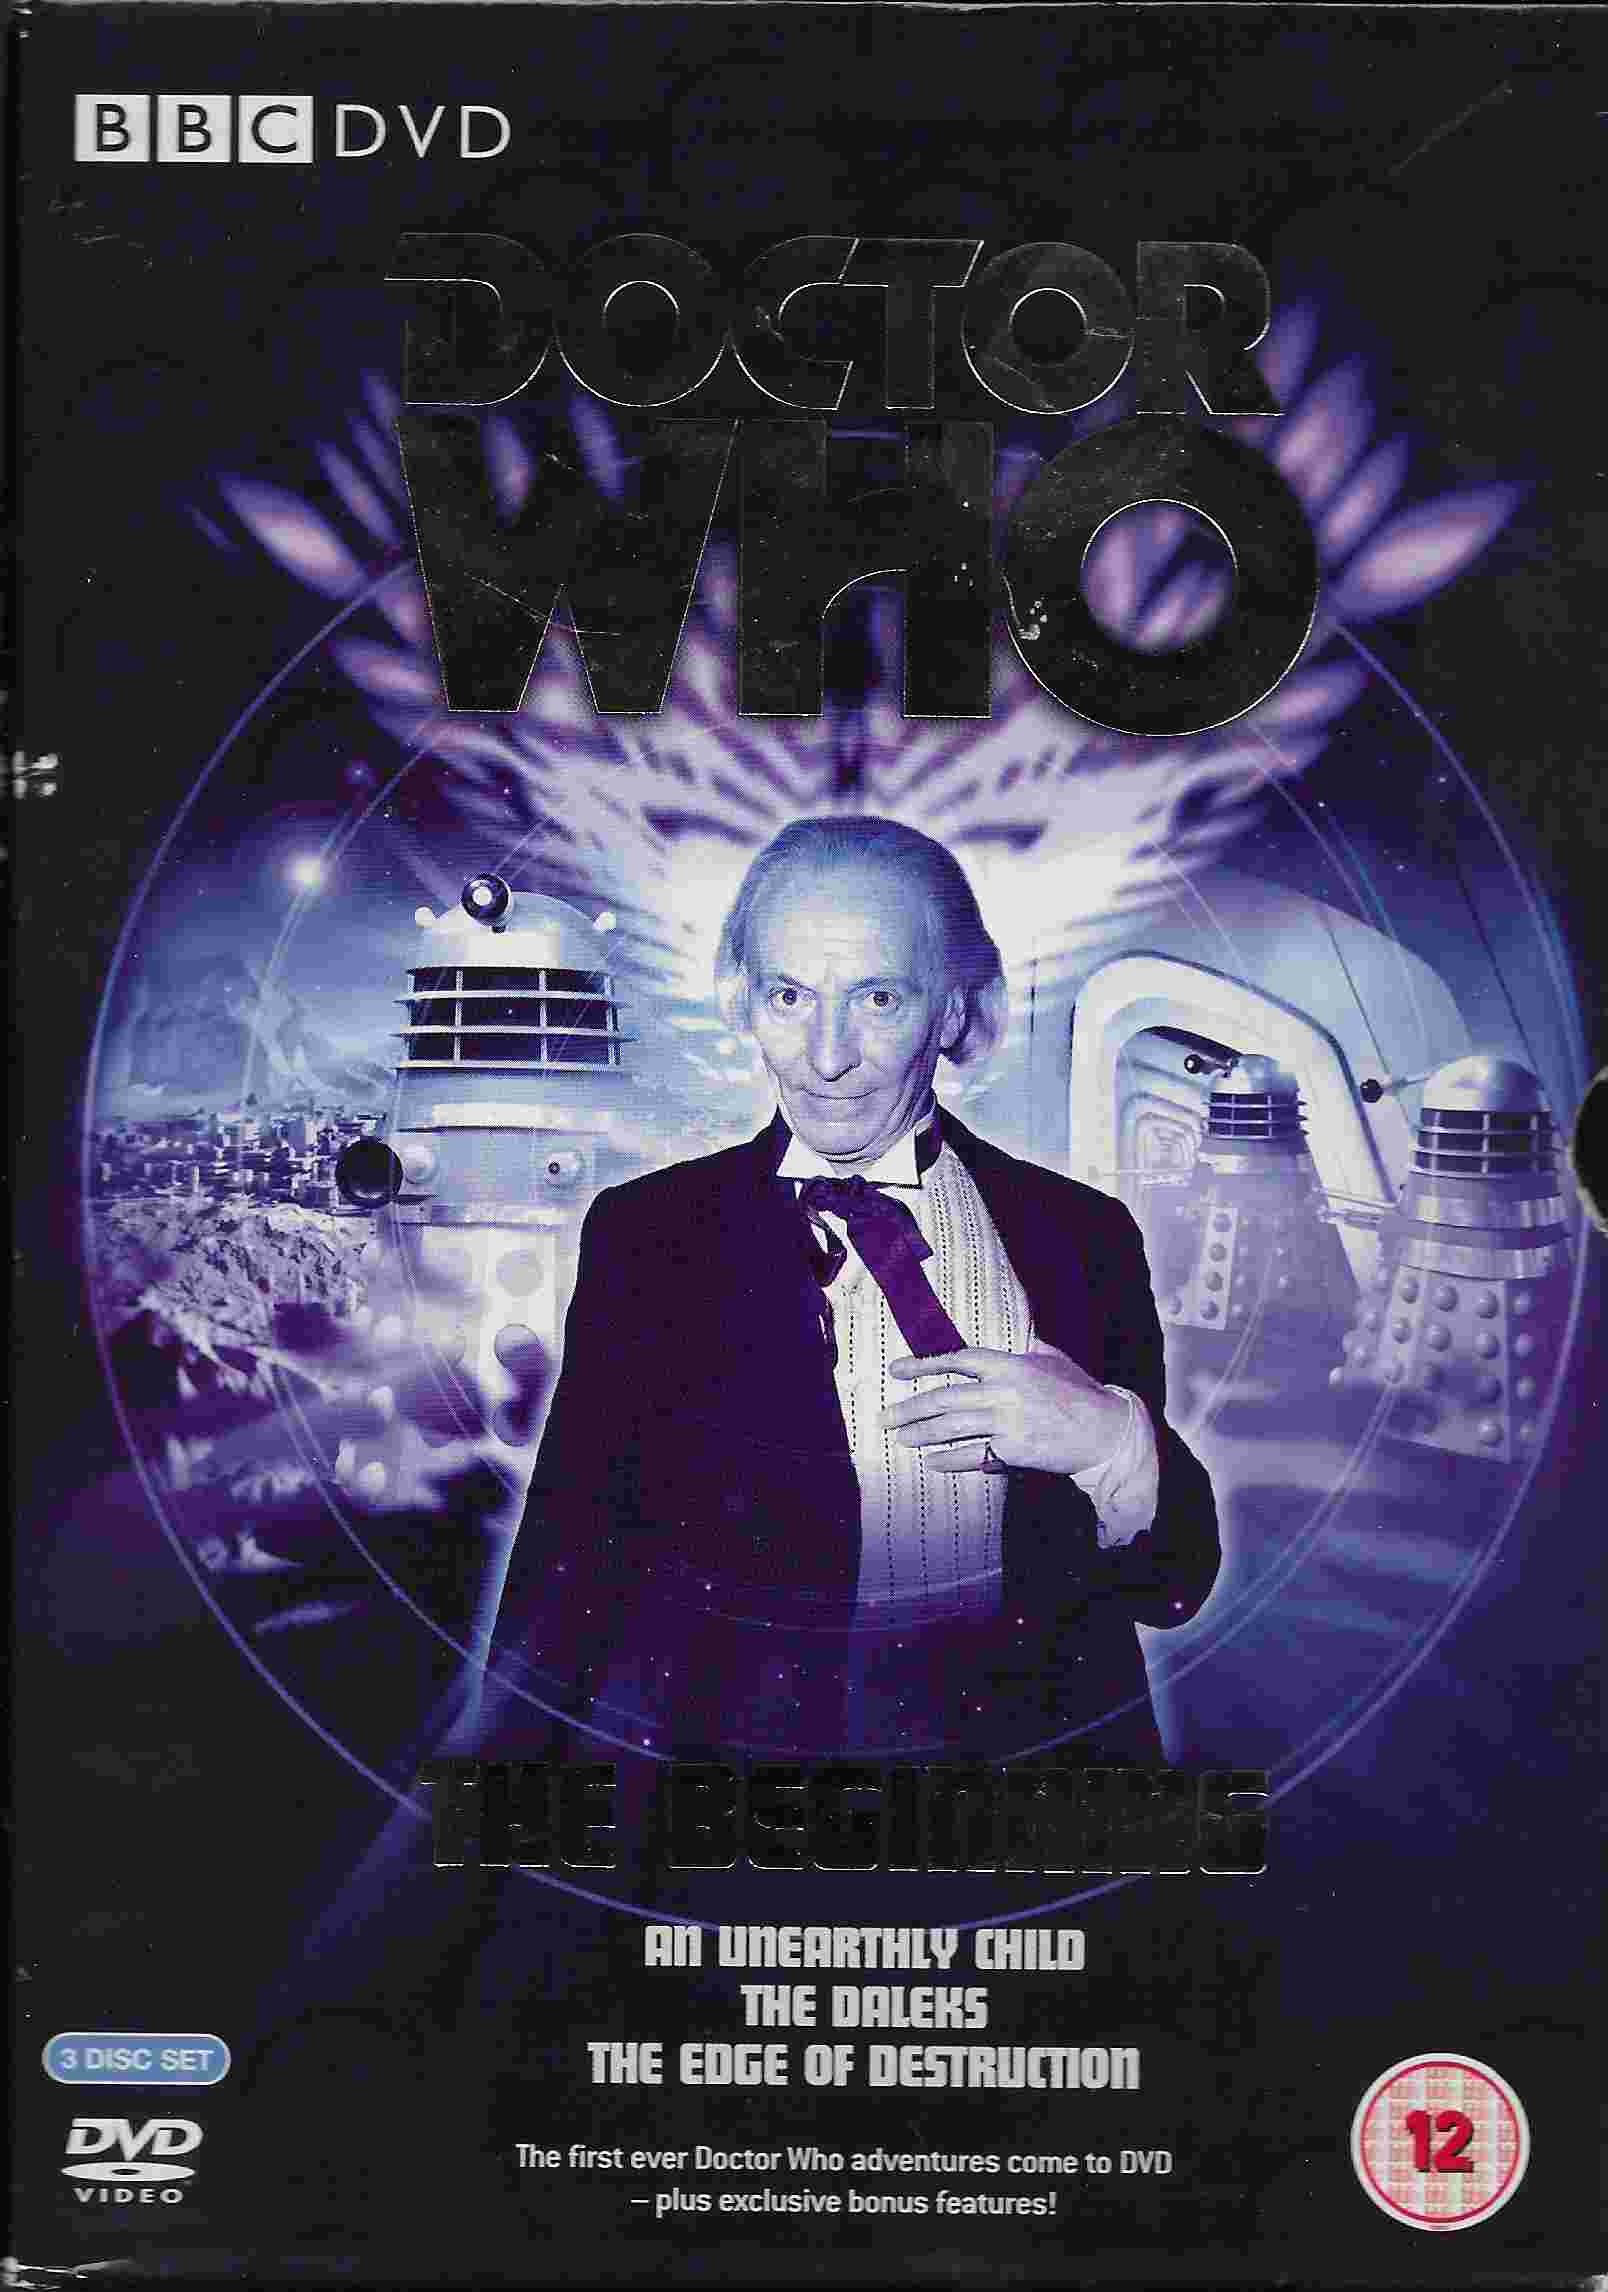 Picture of BBCDVD 1882 Doctor Who - The beginning by artist Anthony Coburn / Terry Nation / David Whitaker from the BBC records and Tapes library